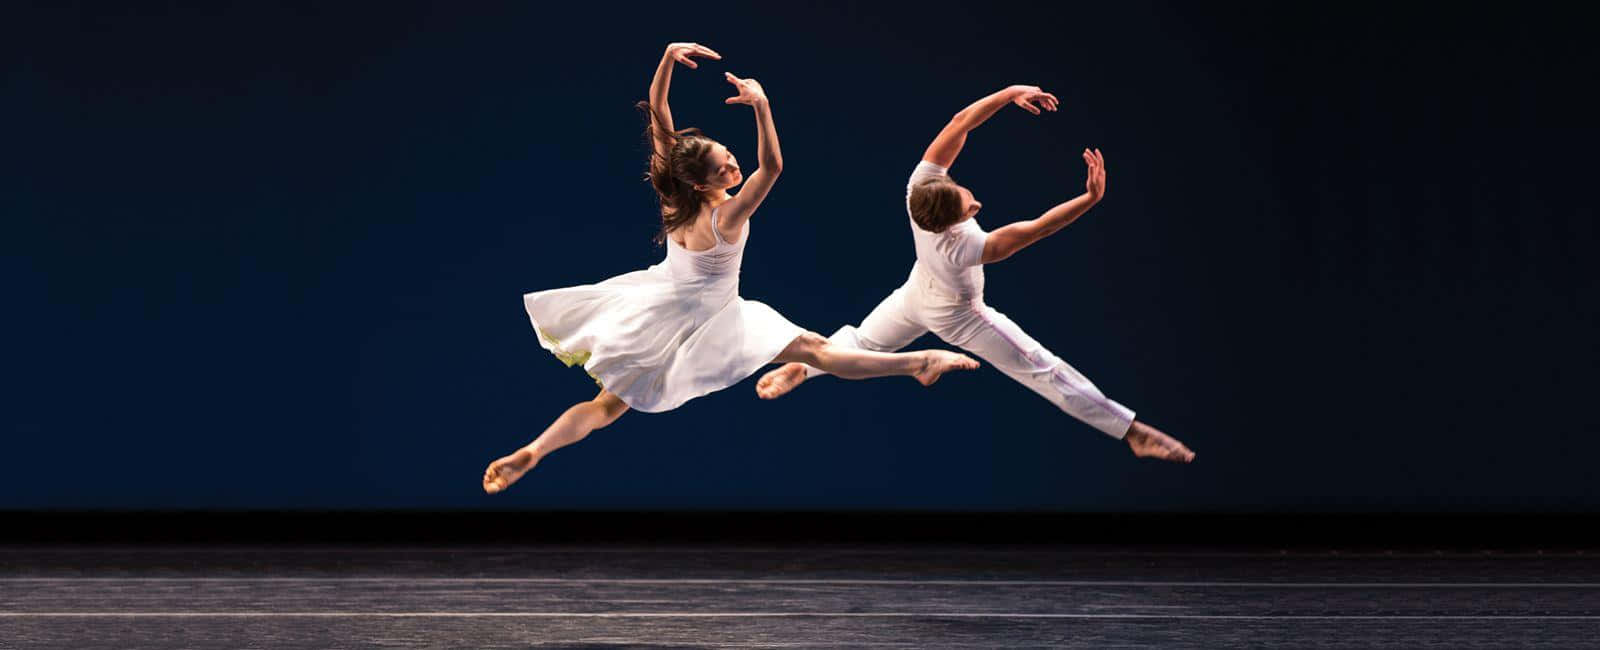 Two Dancers In White Jump In The Air